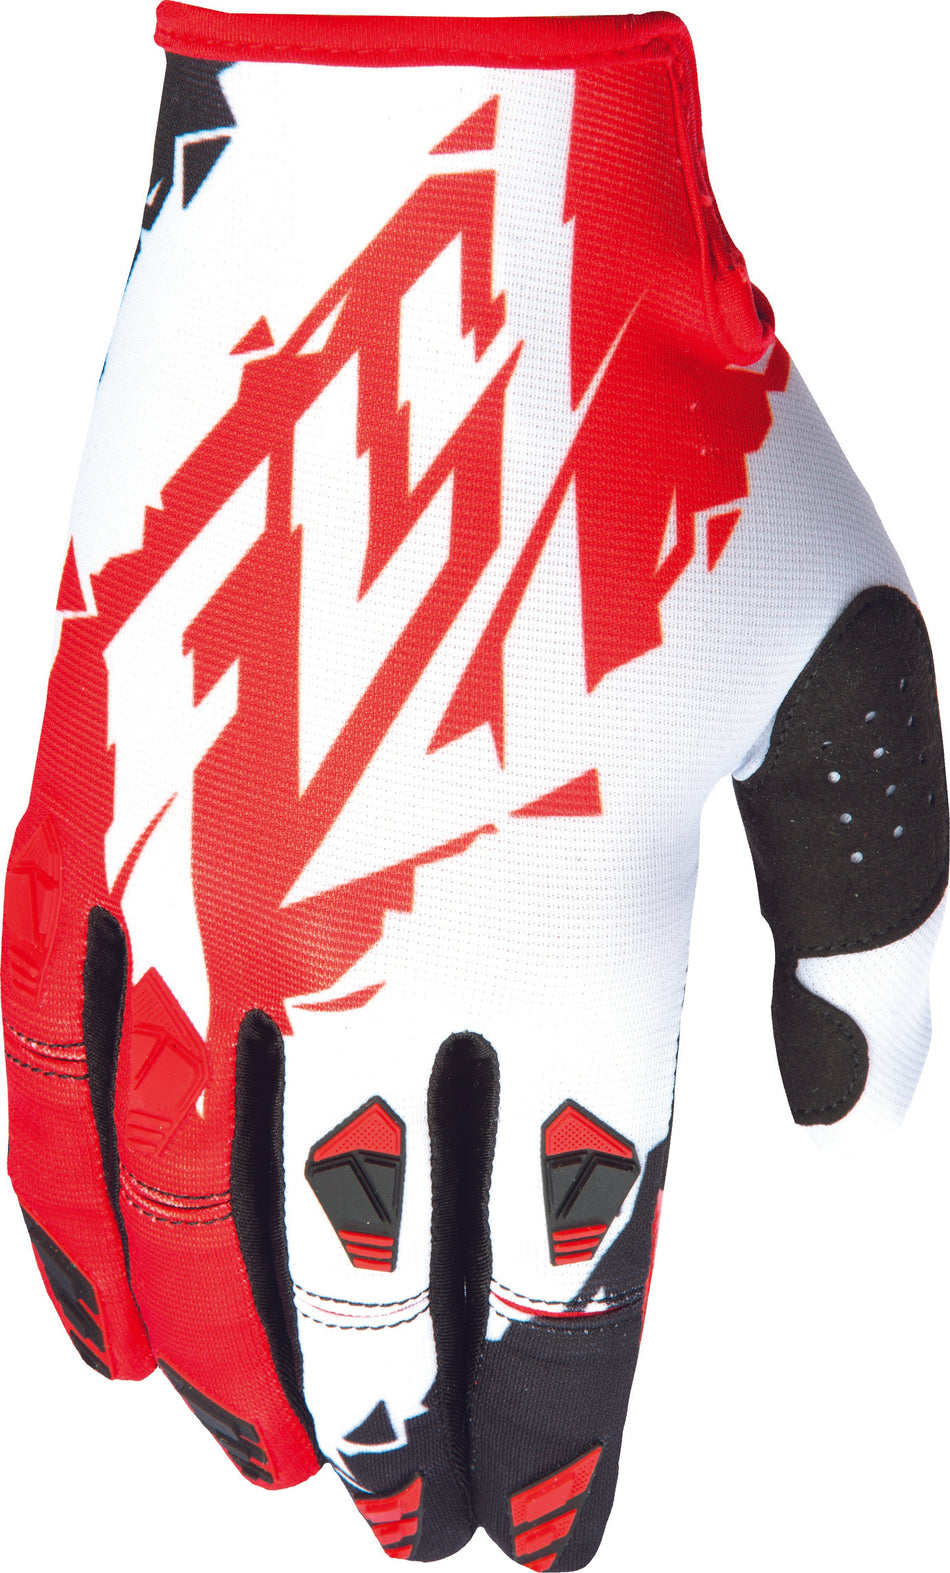 FLY RACING Kinetic Glove Red/White Sz 6 Yl 370-41406